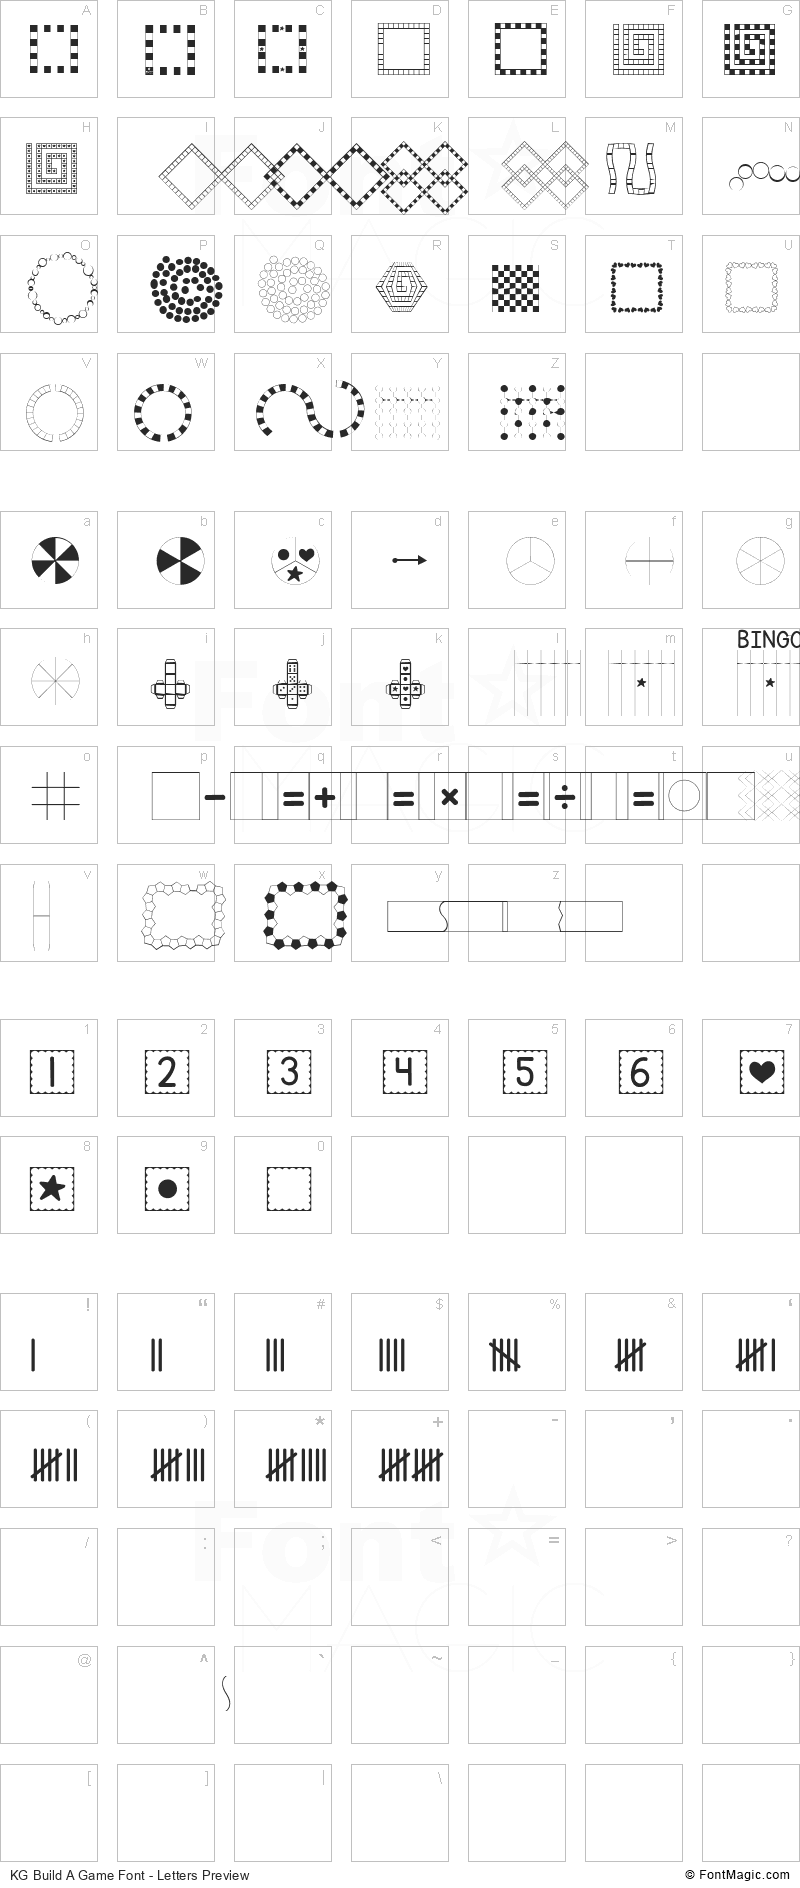 KG Build A Game Font - All Latters Preview Chart